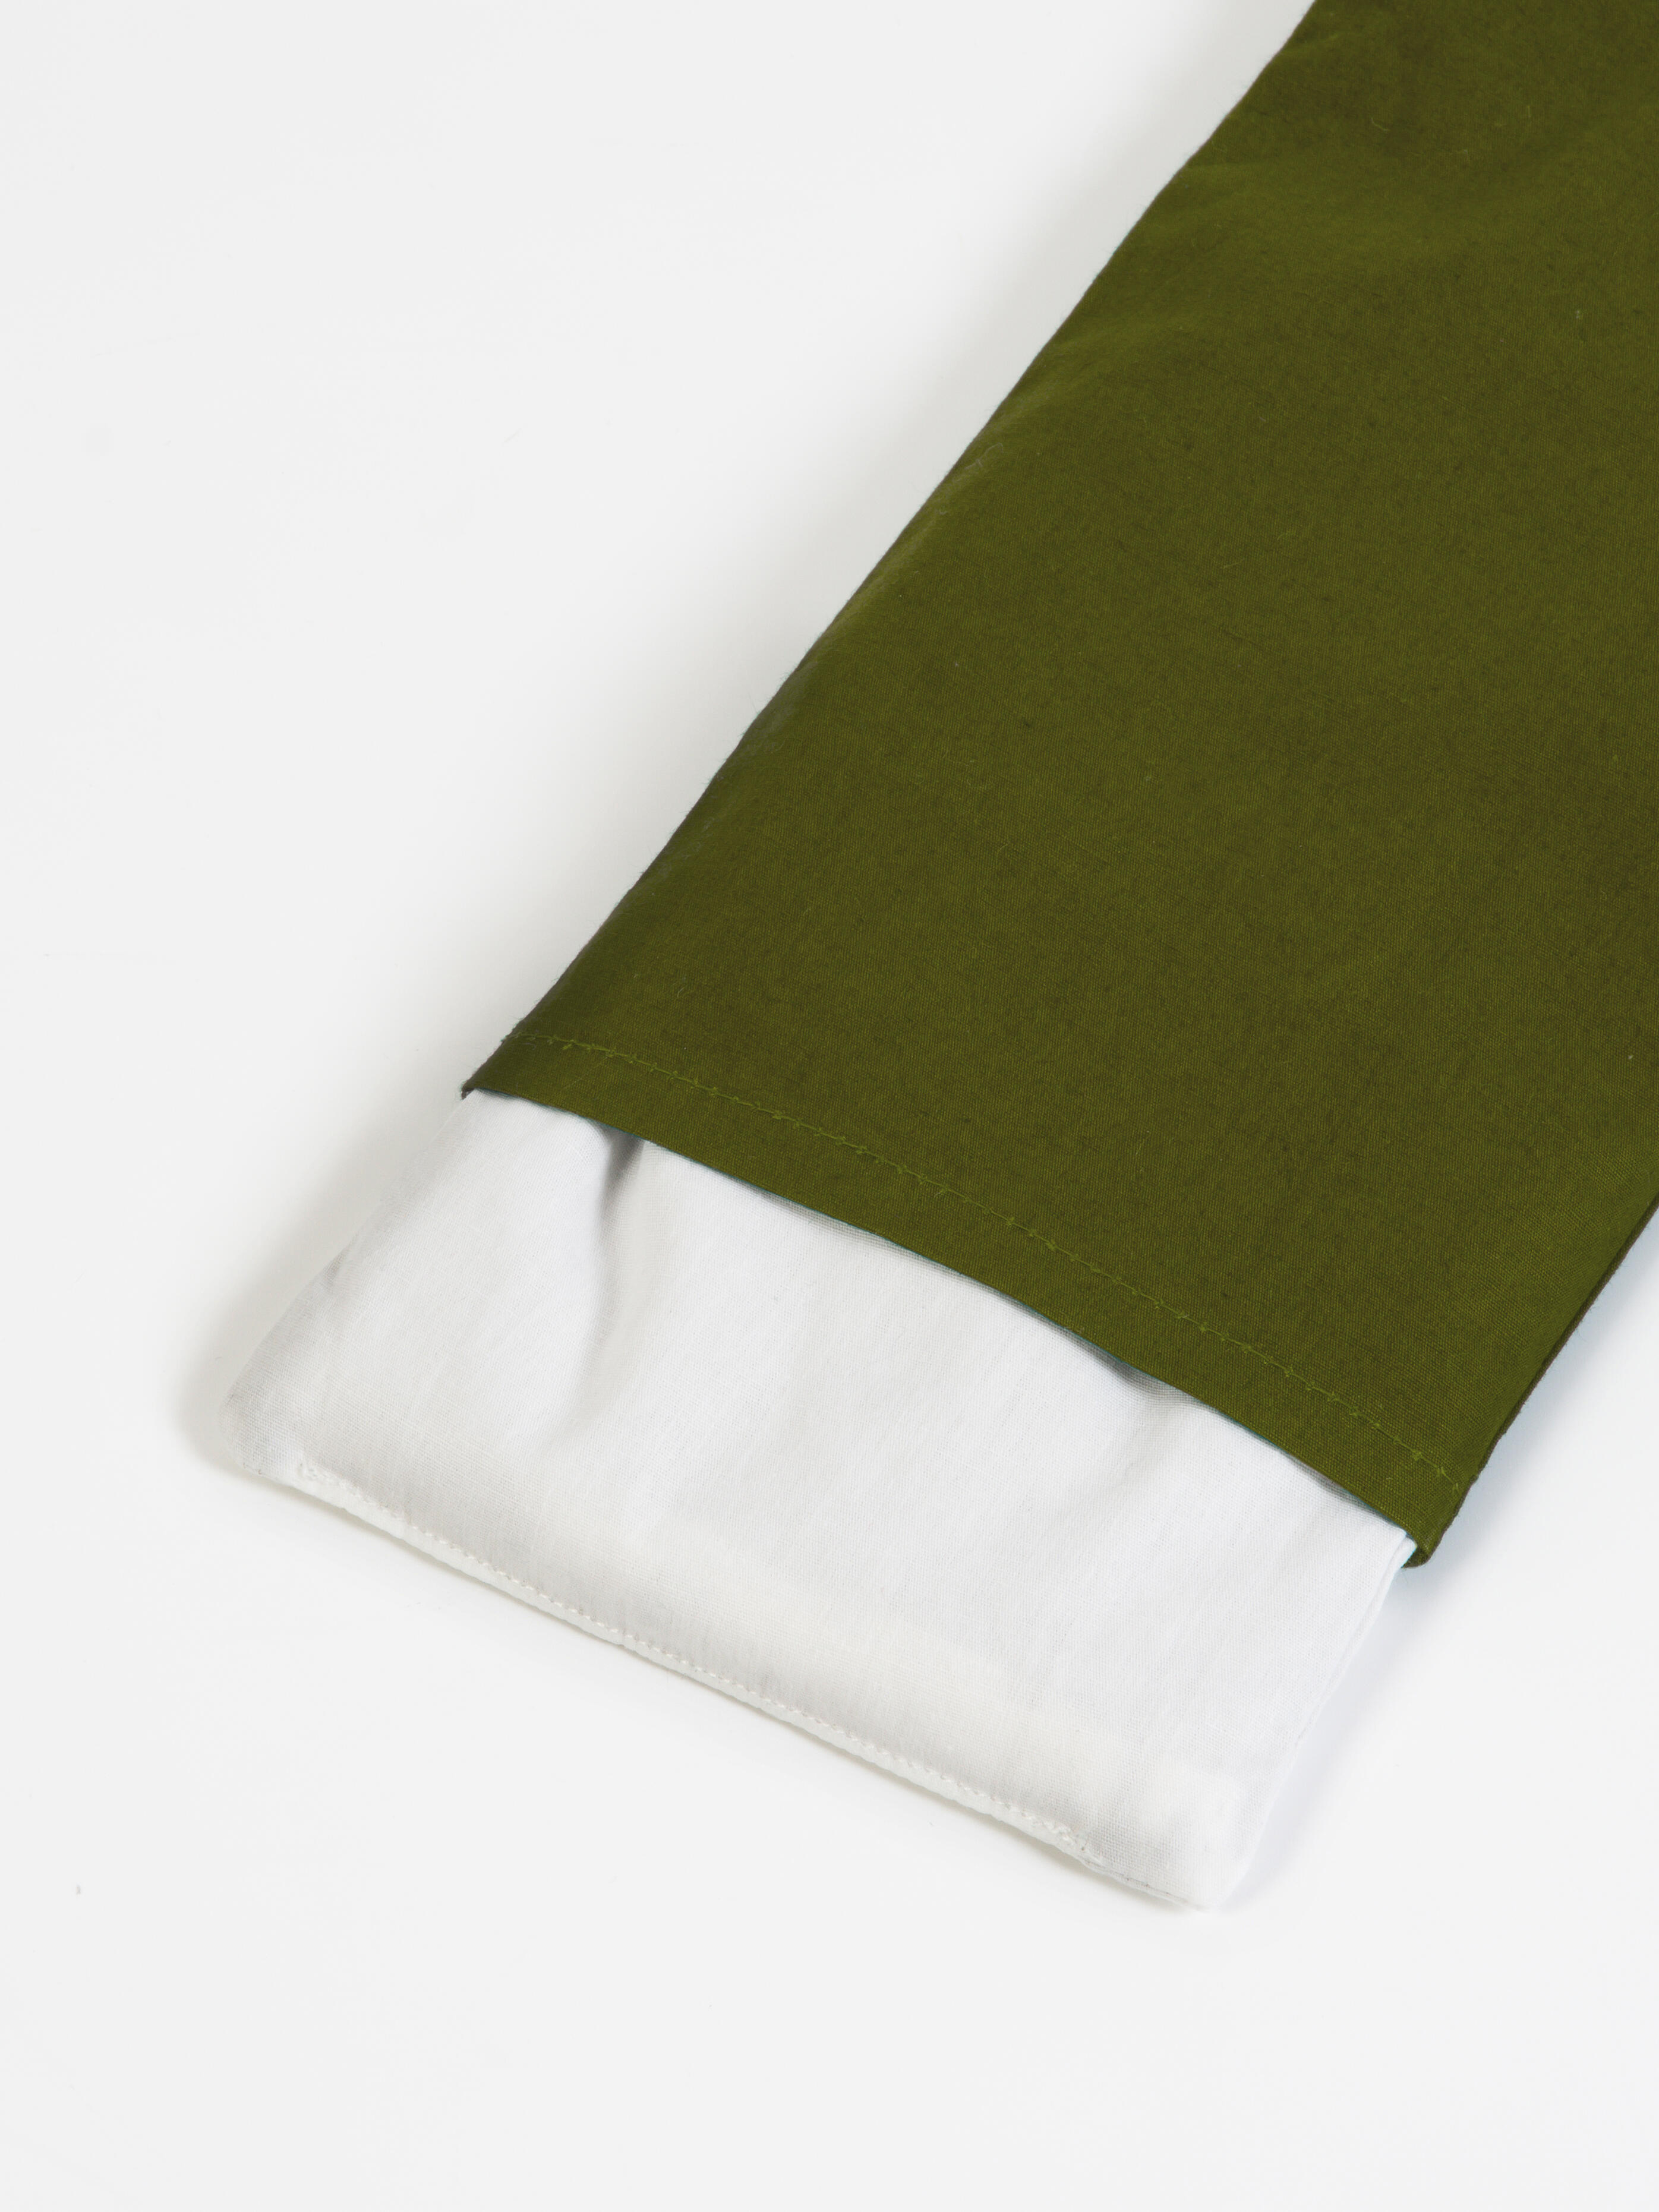 Yoga Studio Scented Lavender & Linseed Eye Pillows - Olive Green 2/2